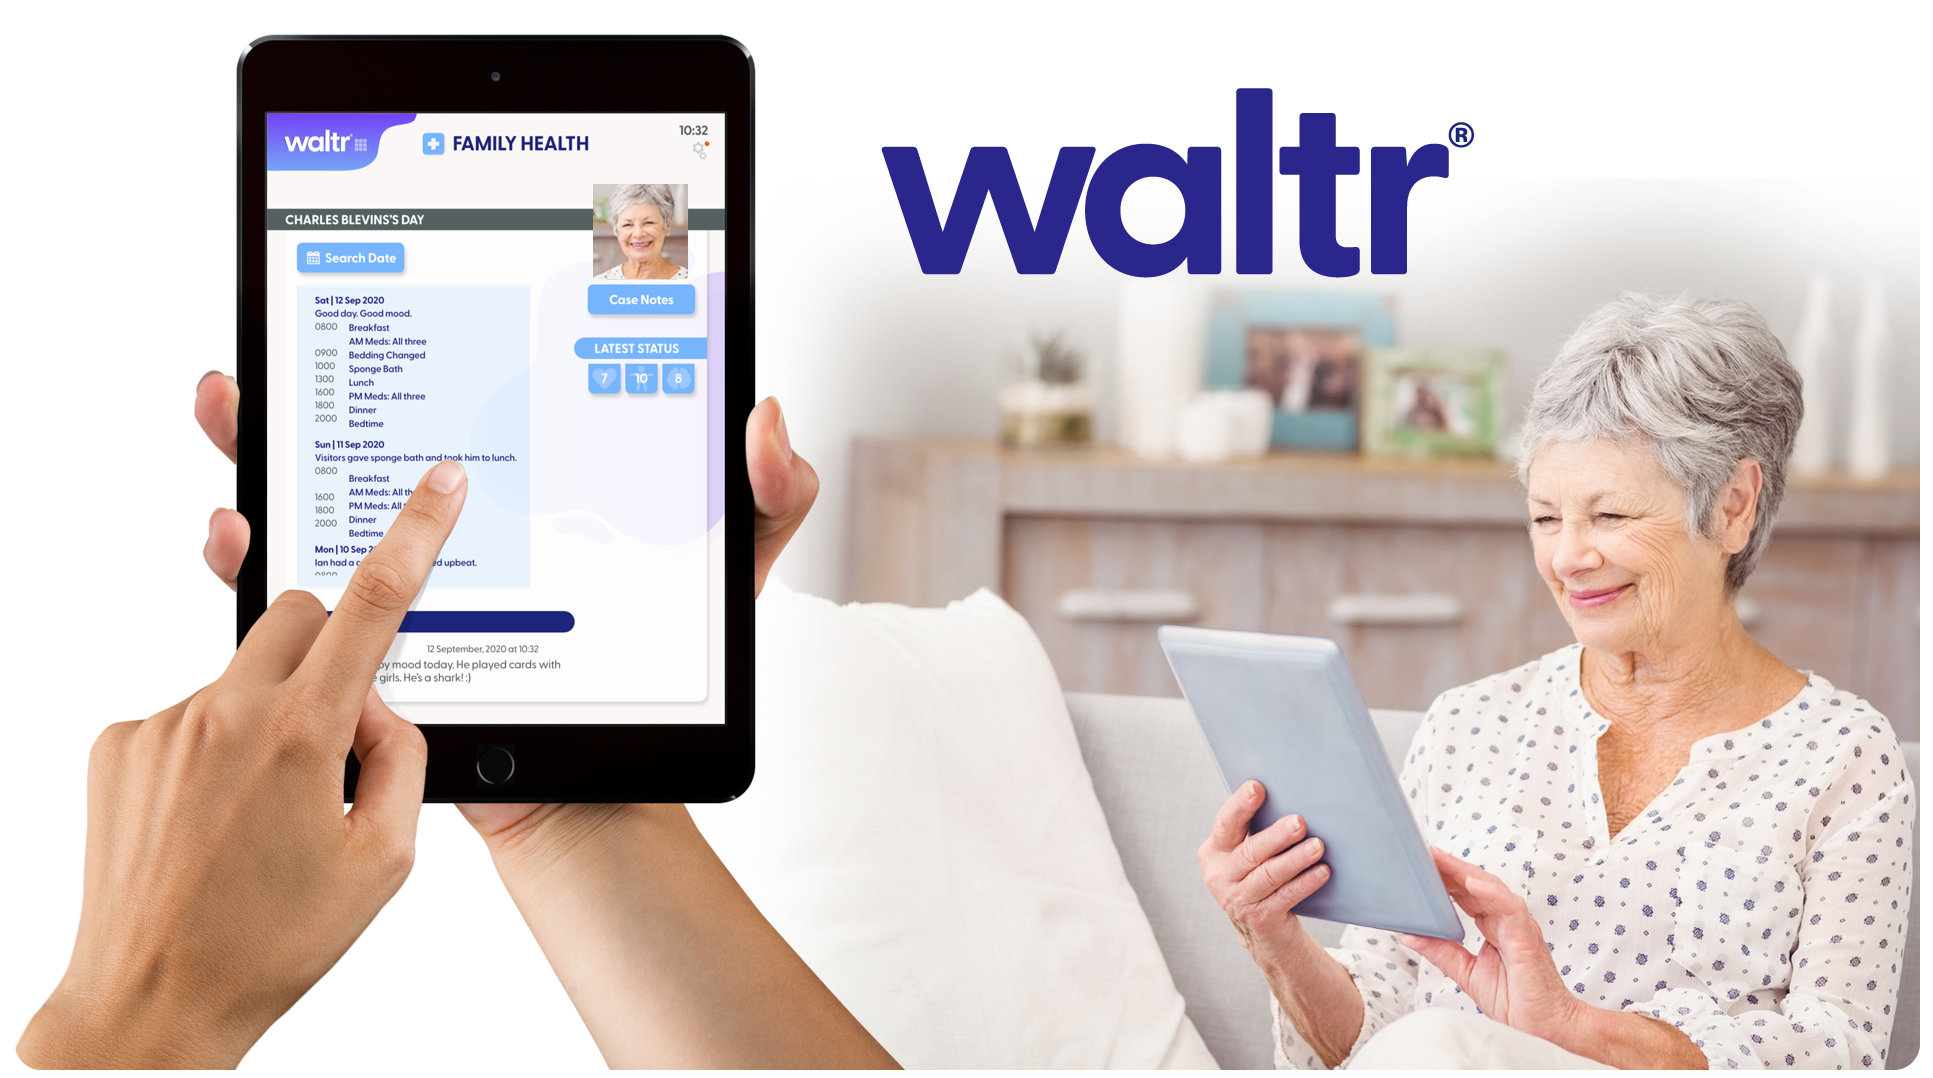 Hero Pic: Walter SaaS App: Tablet app open with hand pointing at screen open, with elderly person similing, using the app in a comfortable home-like setting